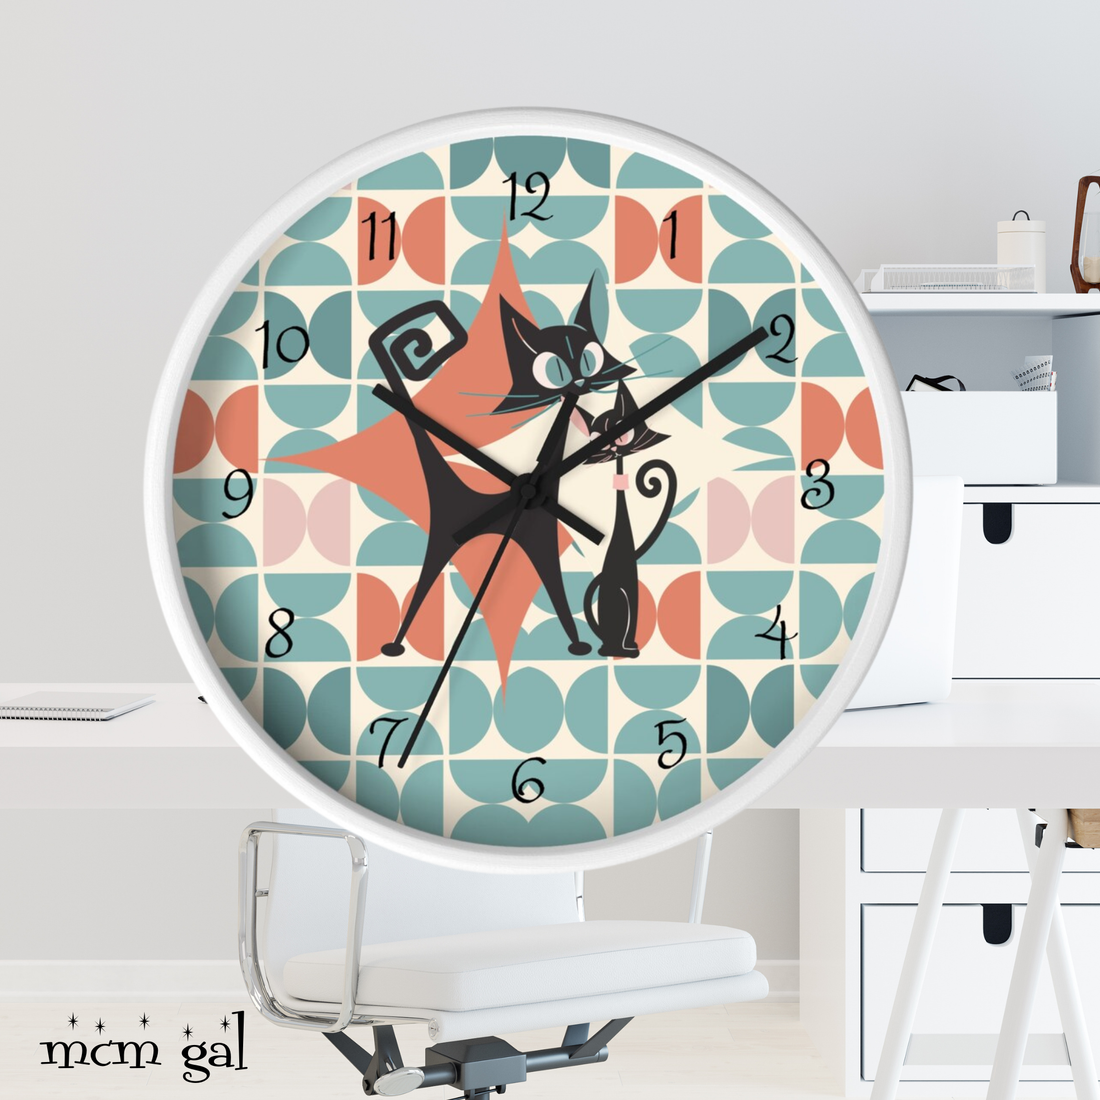 Kitchen Clock, Atomic Cat Retro Mid Century Modern Style With Scandinavian Designed Geometric Shapes, 50s Wall Clock For Cat Lovers